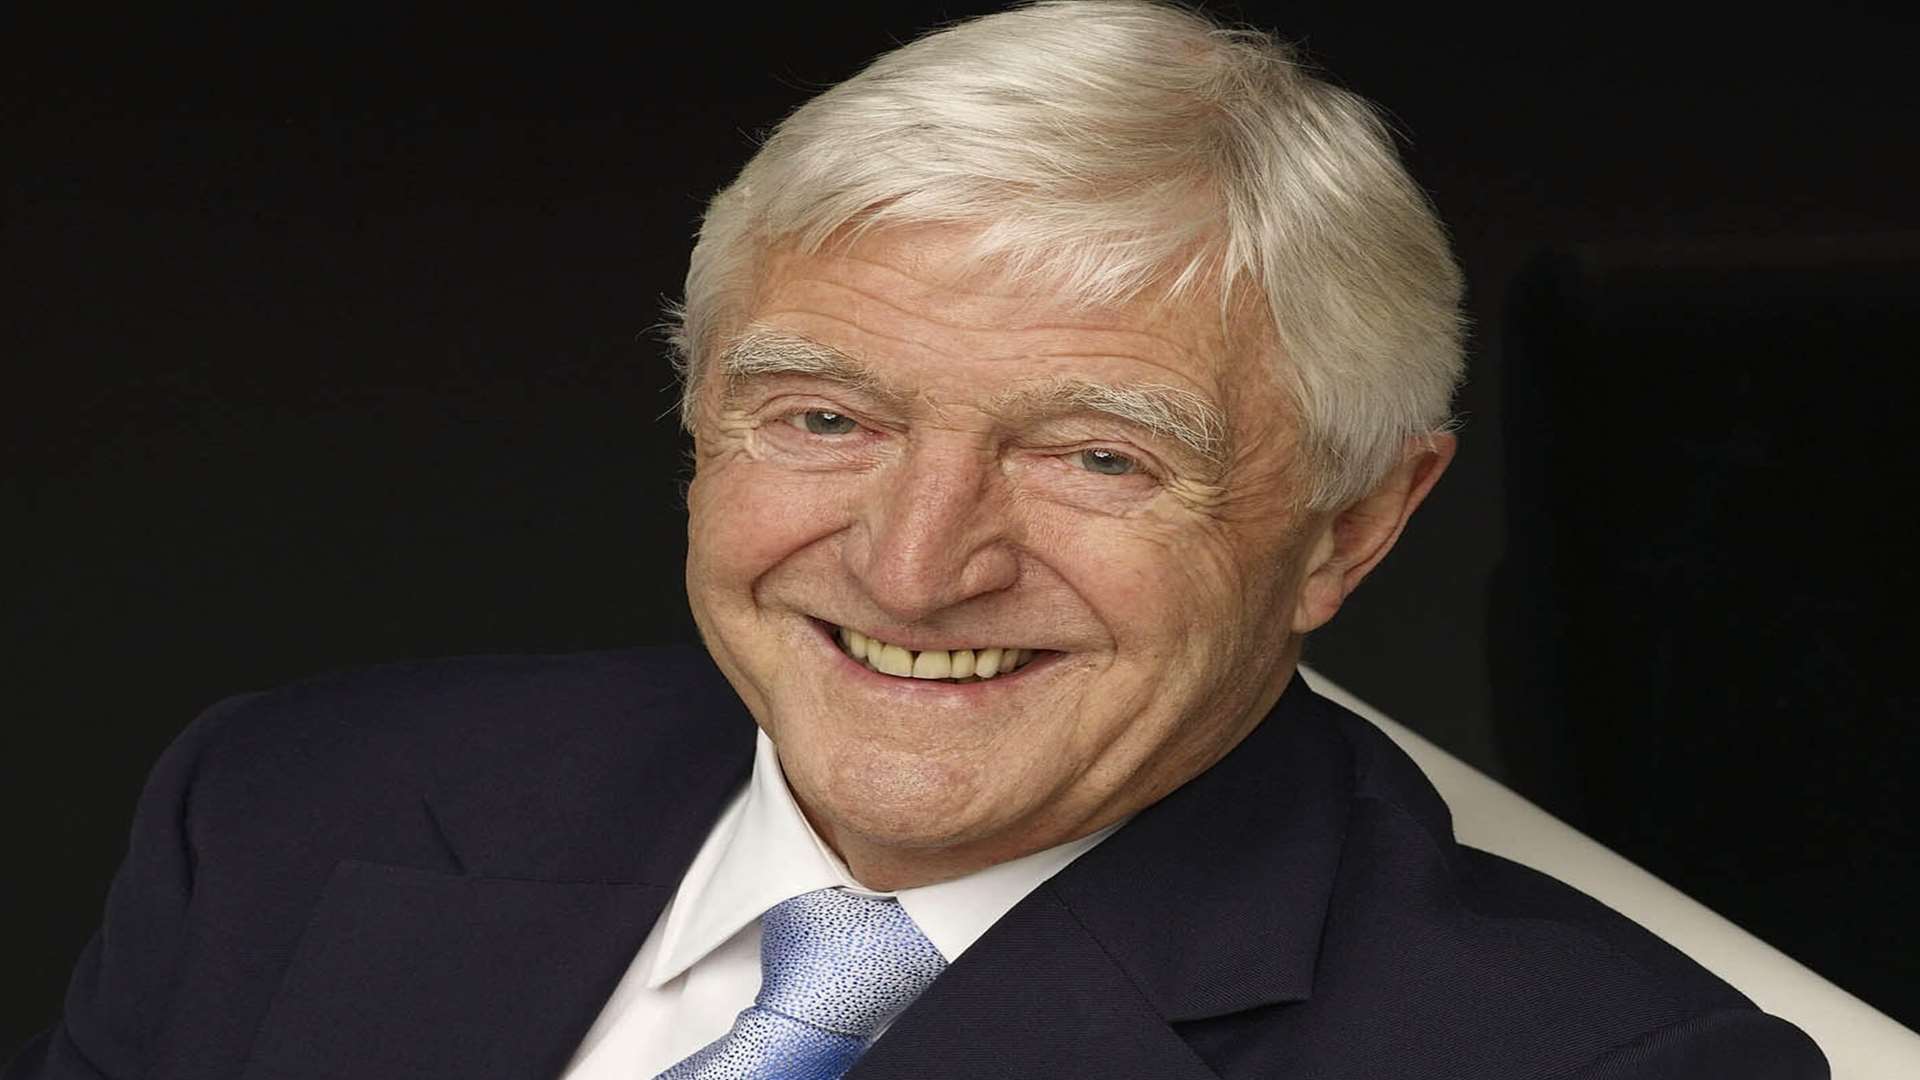 The real Sir Michael Parkinson